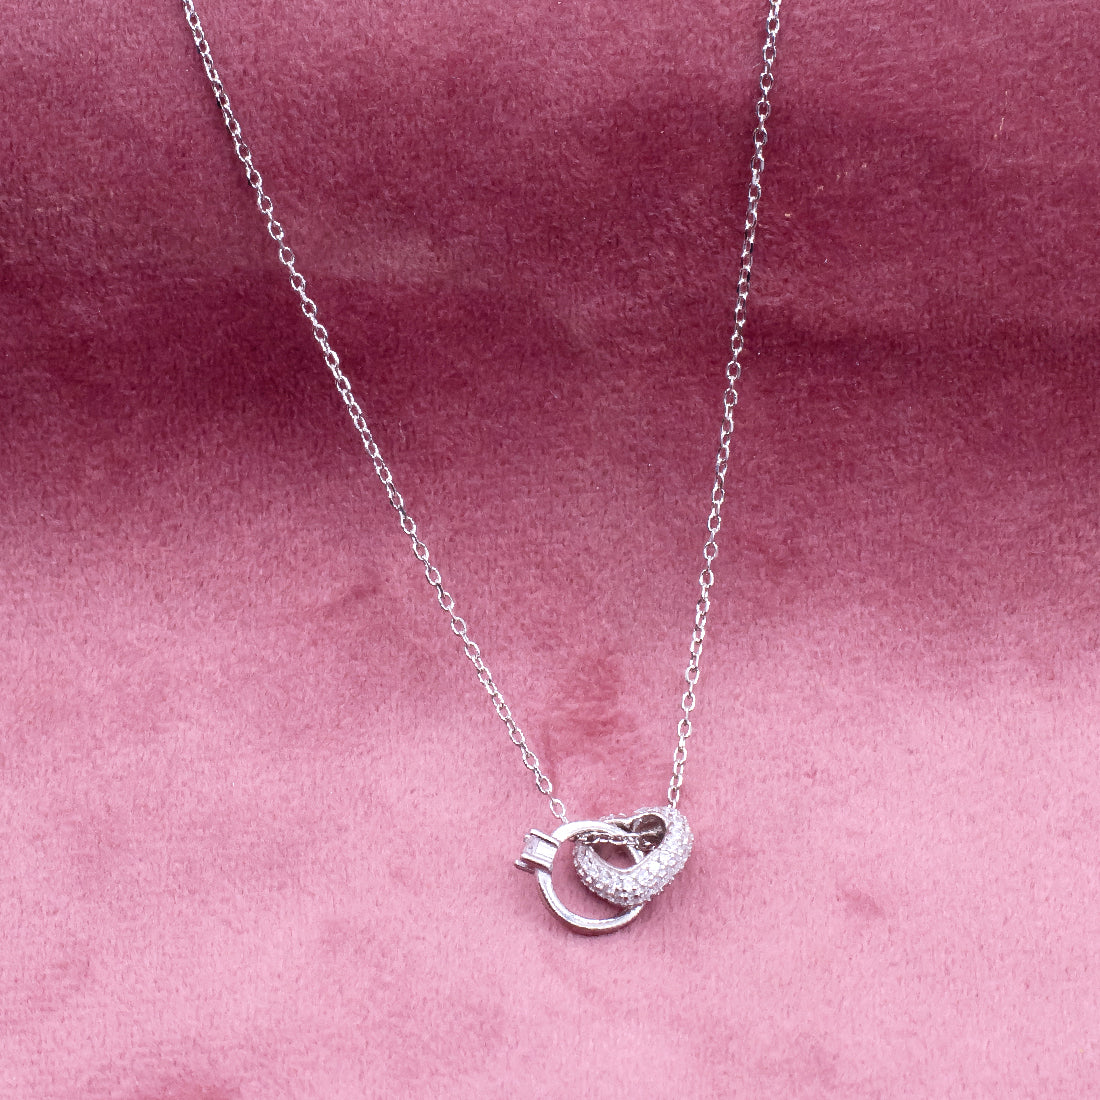 Solitaire ring with Zircon Heart Charm Chain Pendant